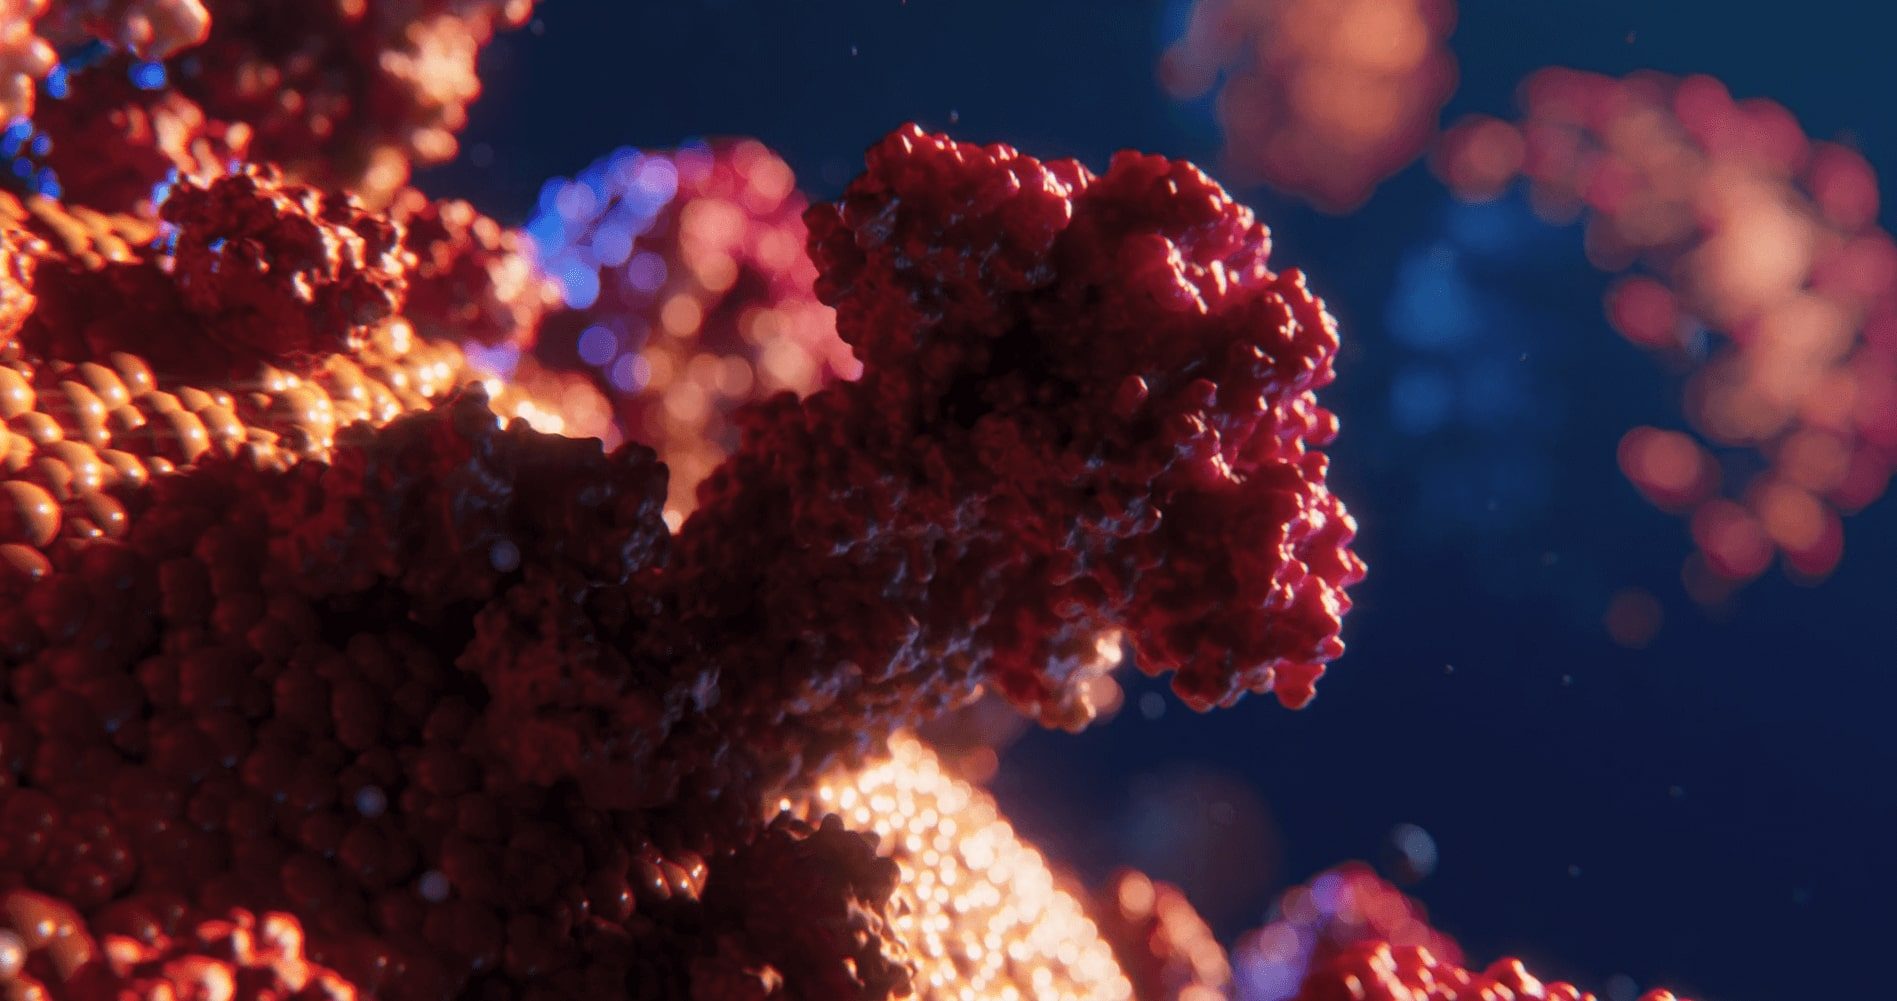 This image shows a 3D animation of the spike protein on a corona virus 